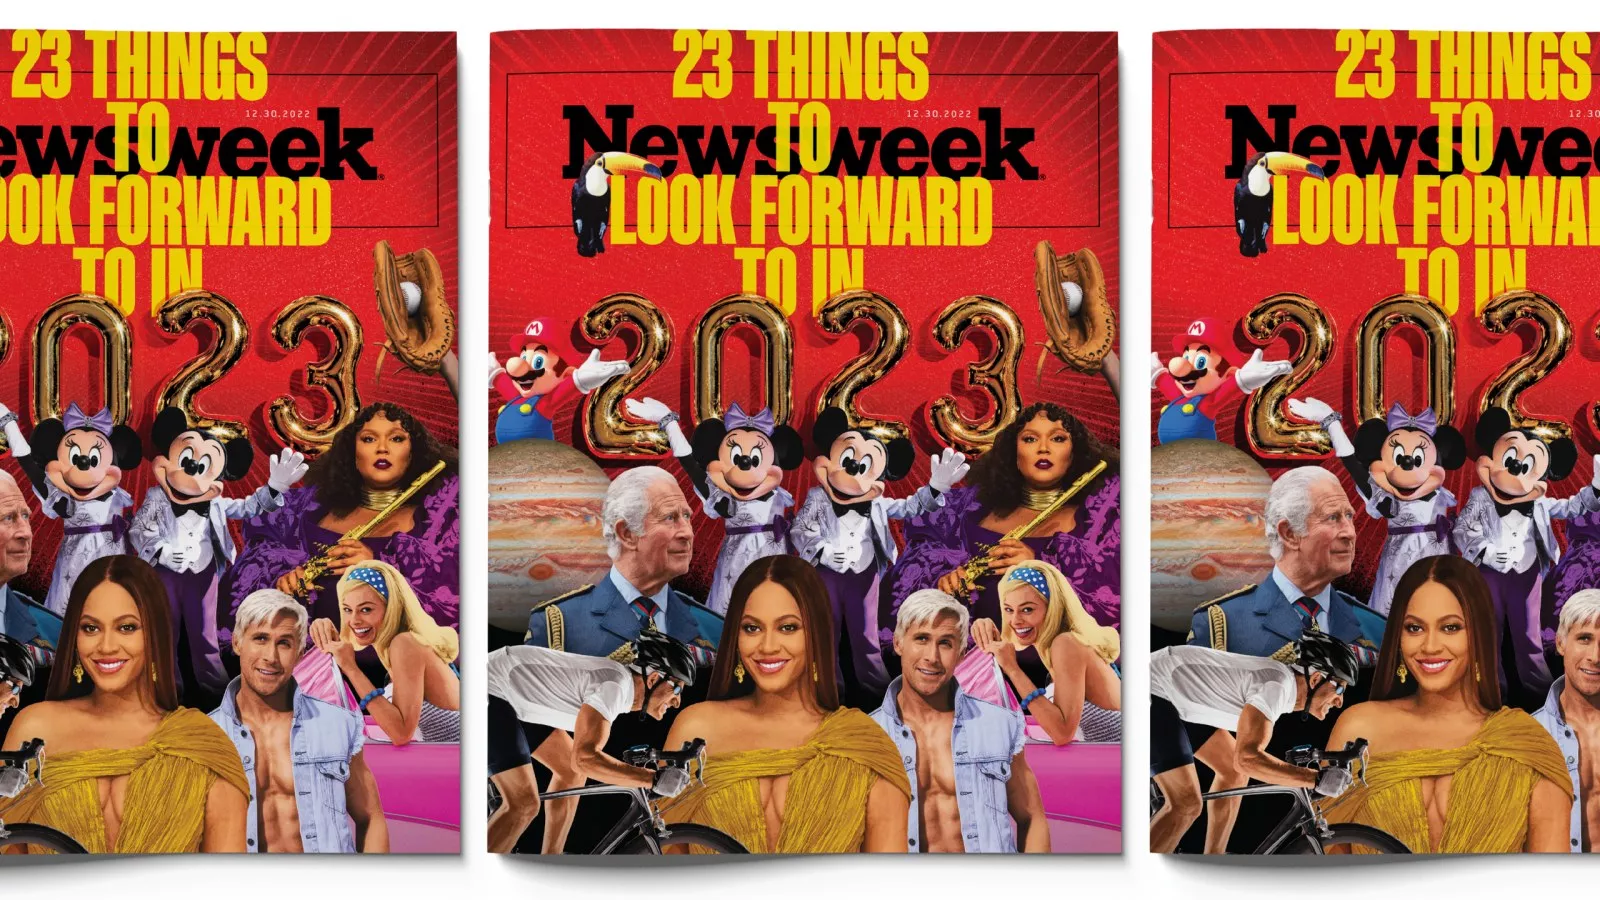 From Medical Advances to Disney Magic, 23 Things to Look Forward to in 2023